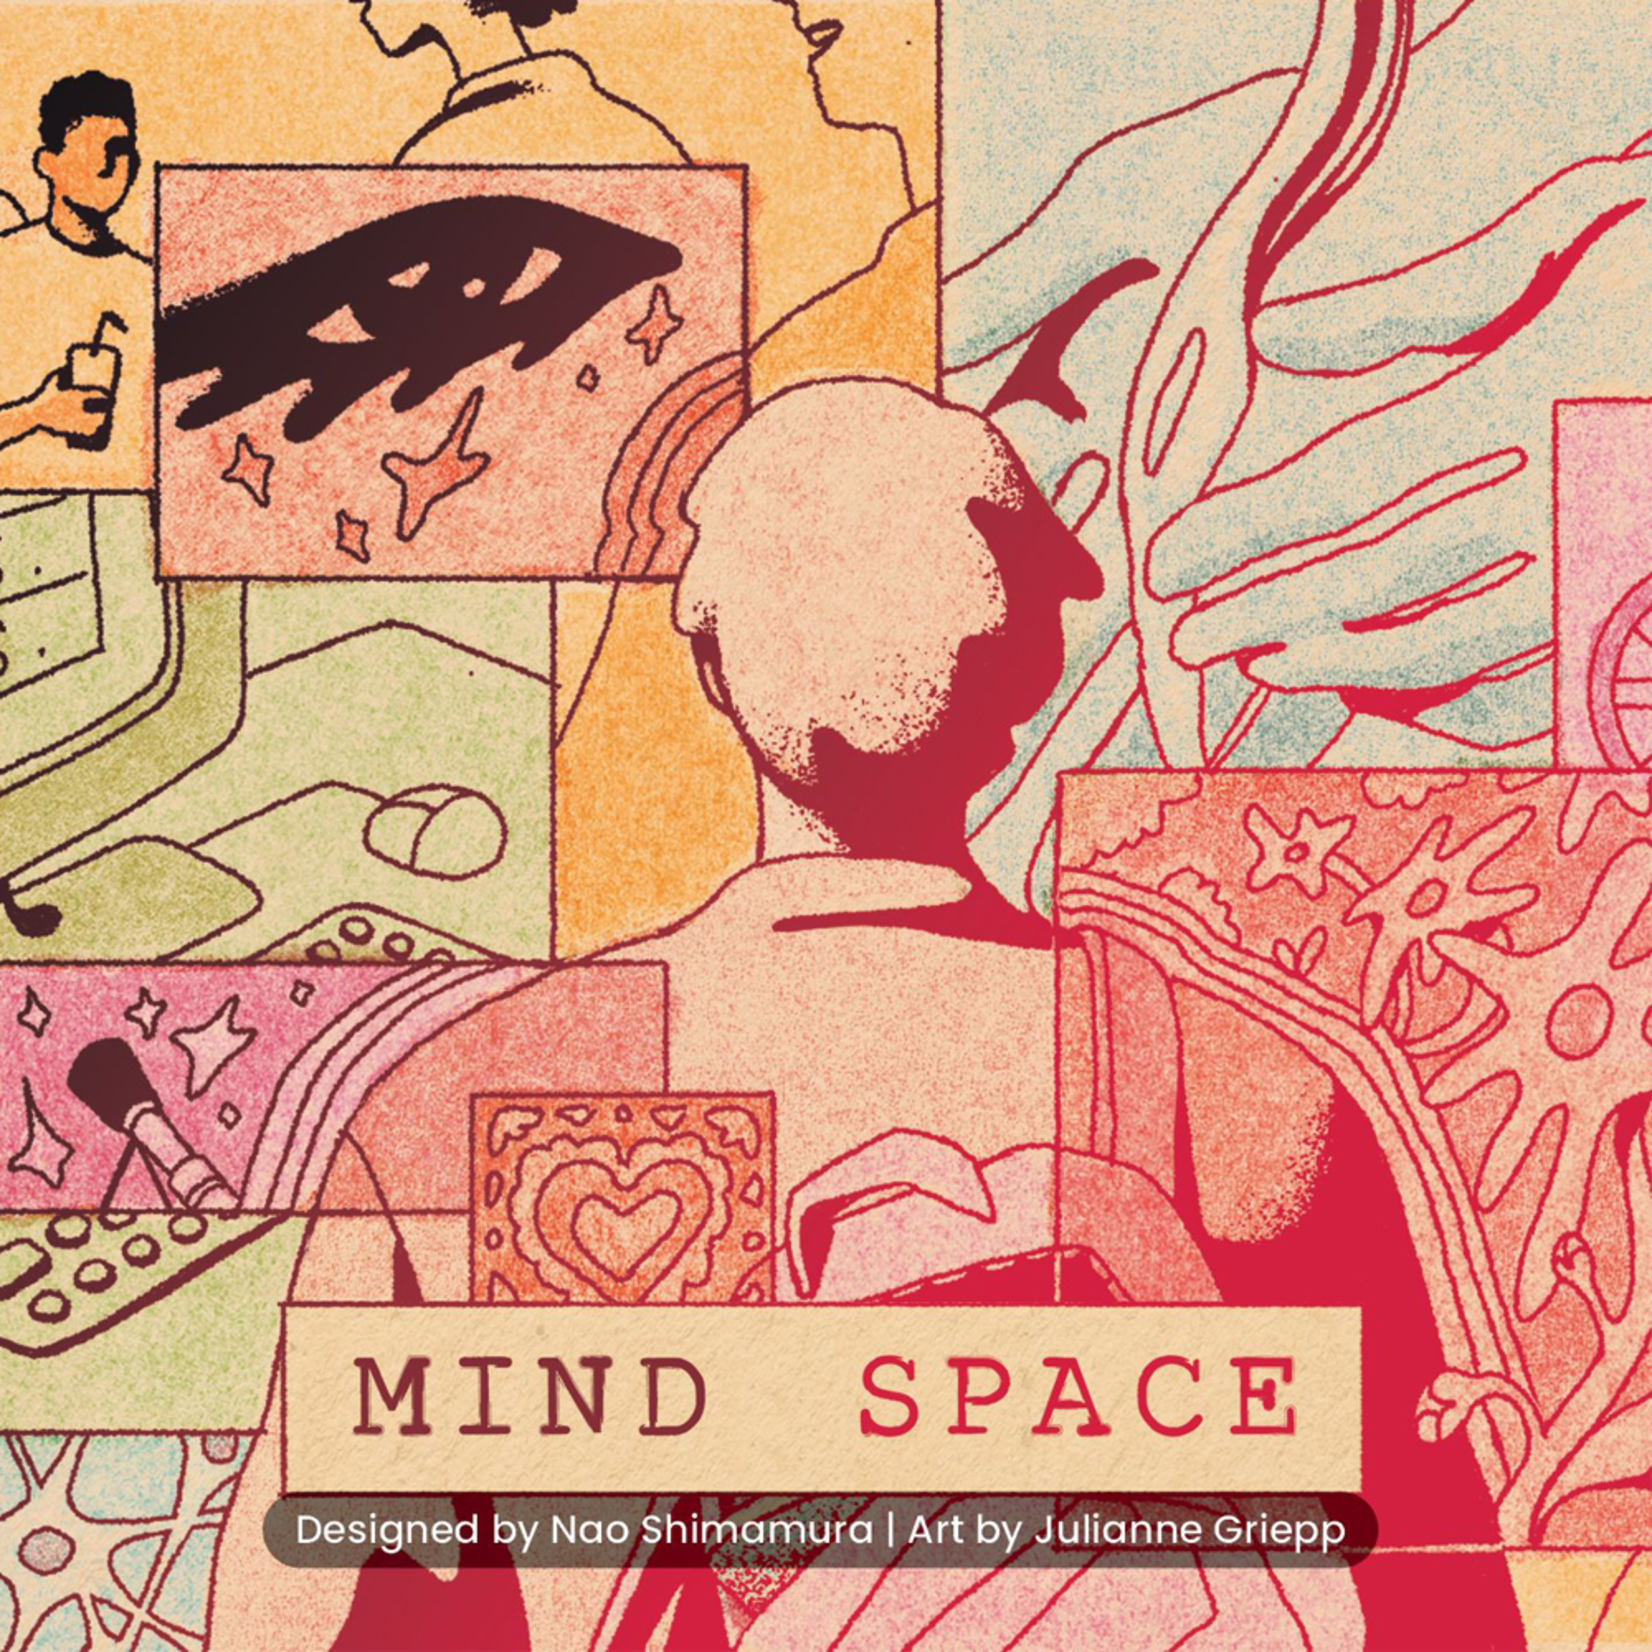 Allplay Mind Space